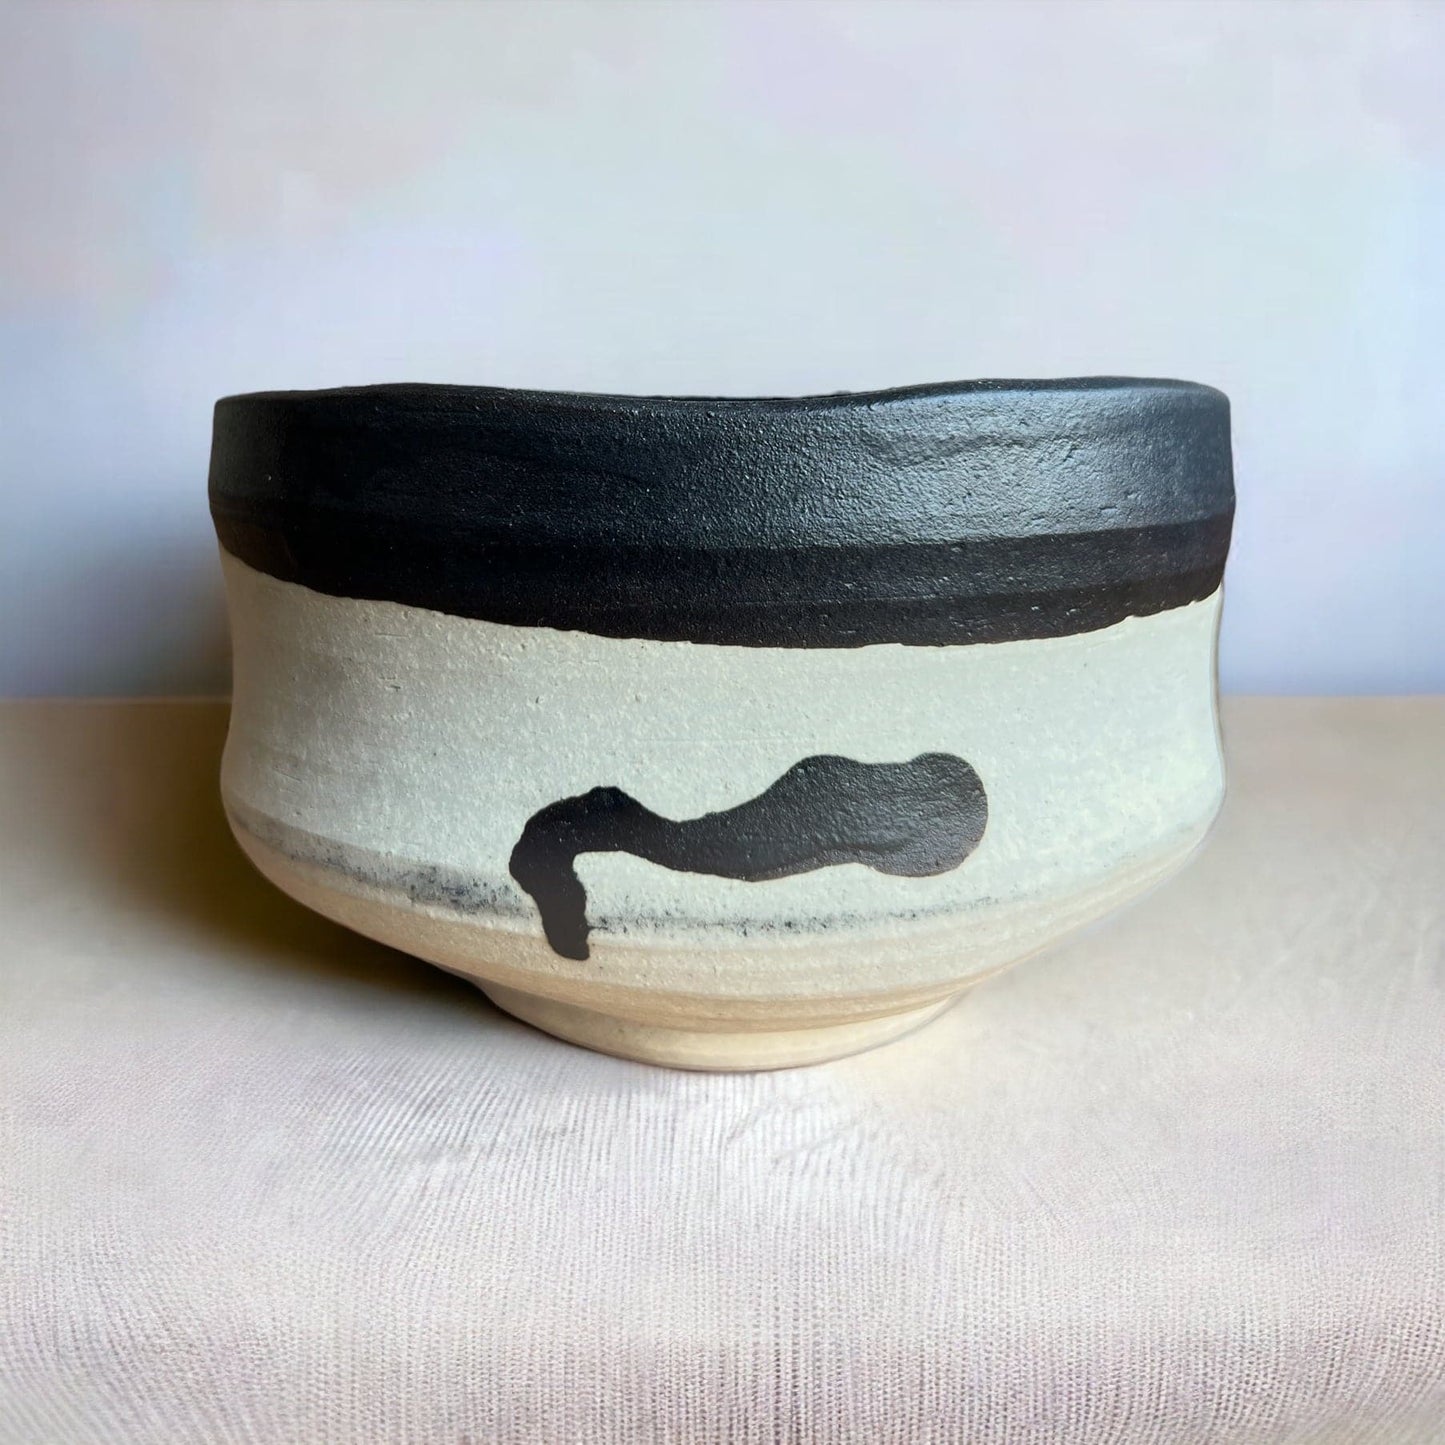 Another side of the Hand Made Ink Spot Matcha Bowl.